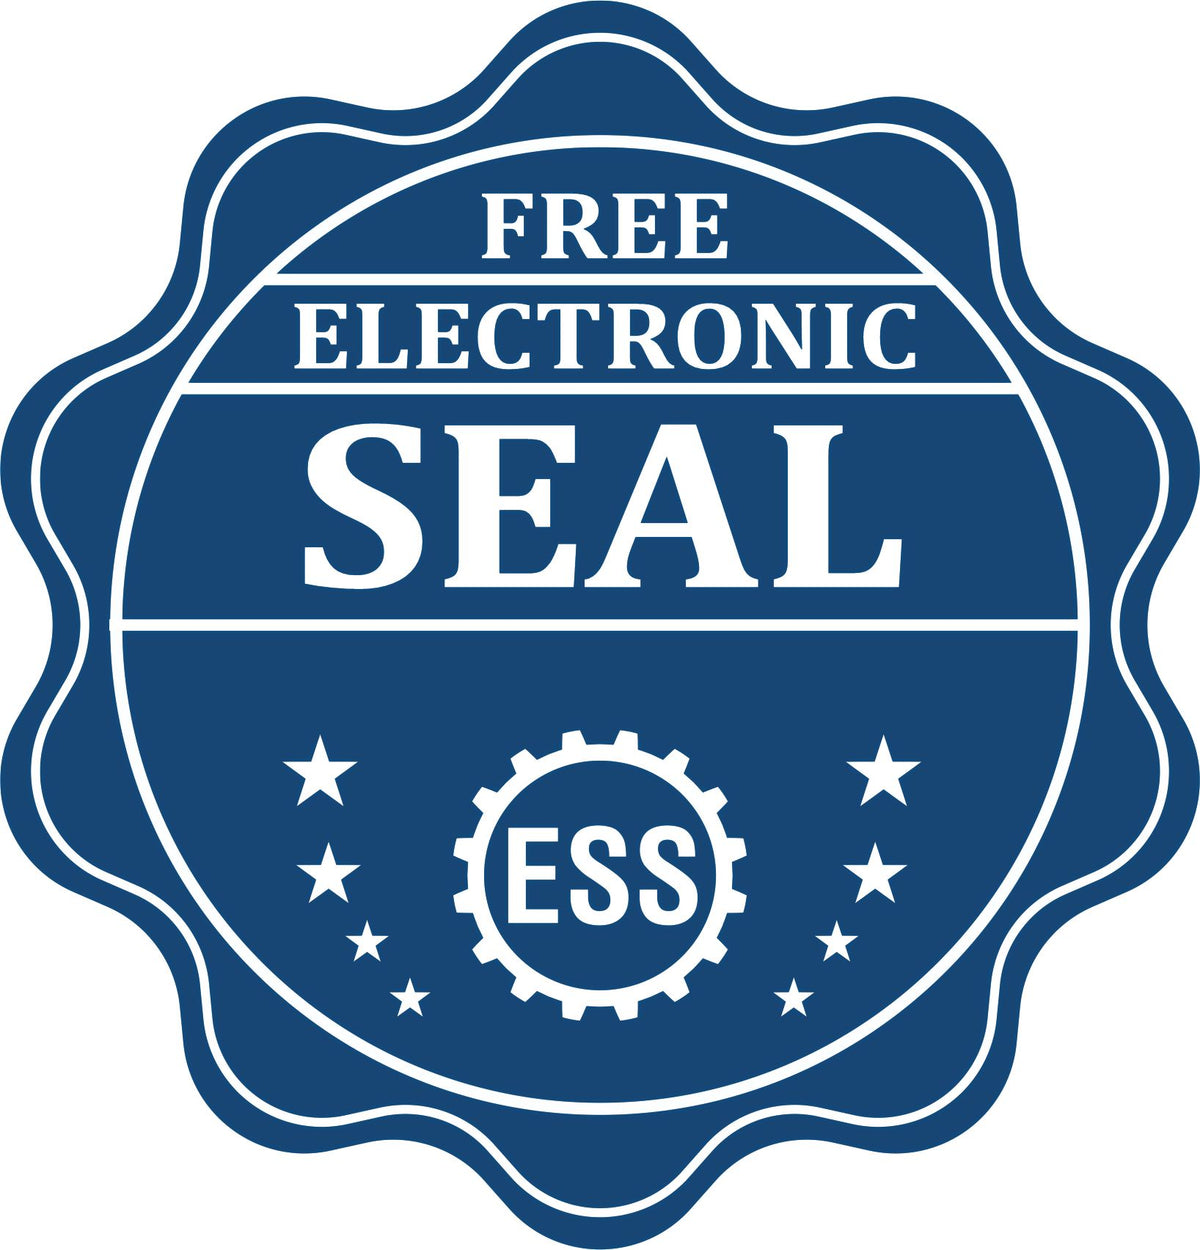 A badge showing a free electronic seal for the State of Nebraska Soft Land Surveyor Embossing Seal with stars and the ESS gear on the emblem.